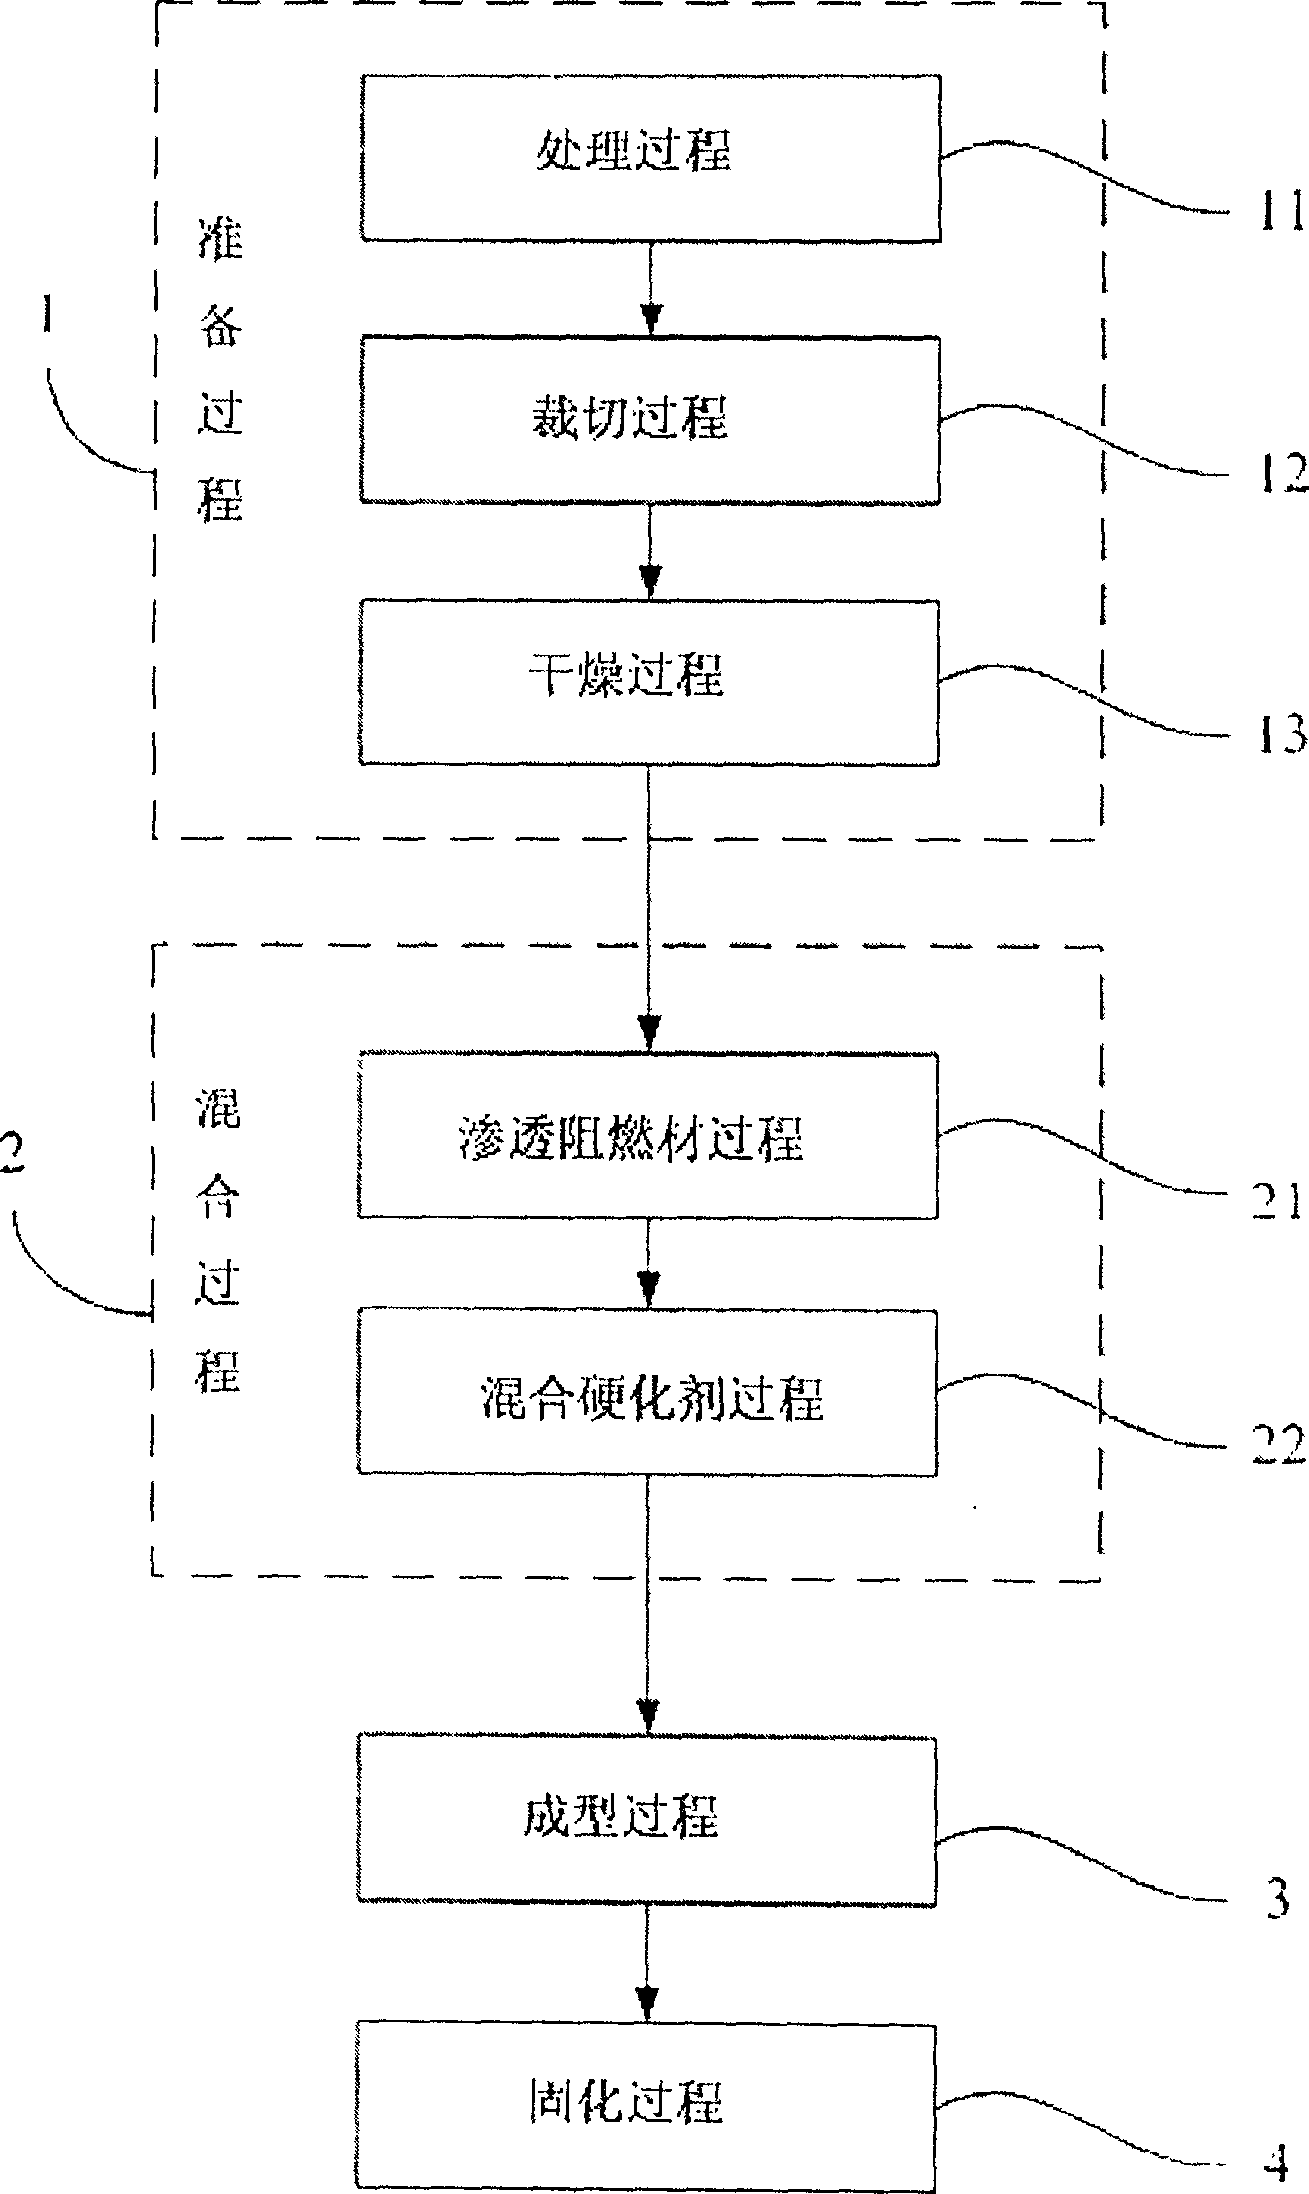 Method of mineralizing plant fiber and its applications